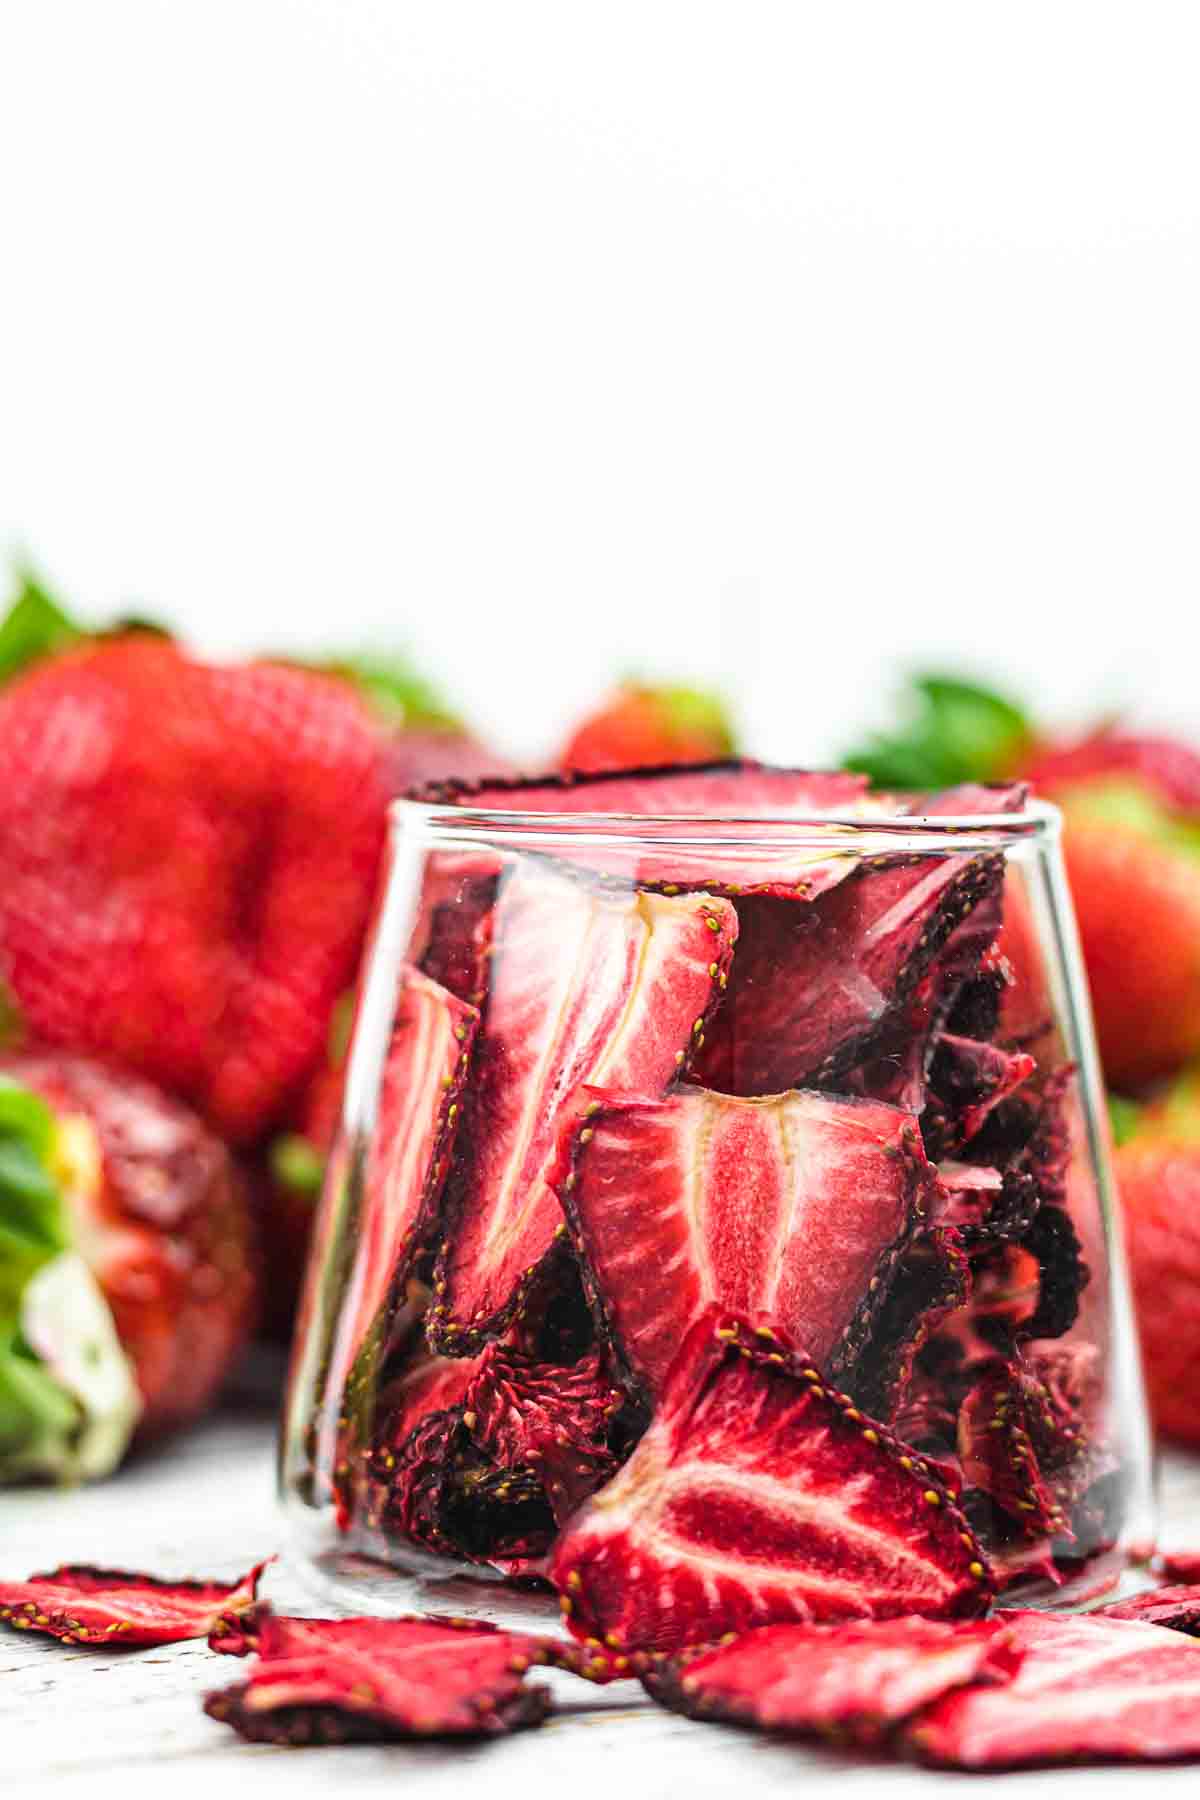 Dehydrated Strawberries in a glass.